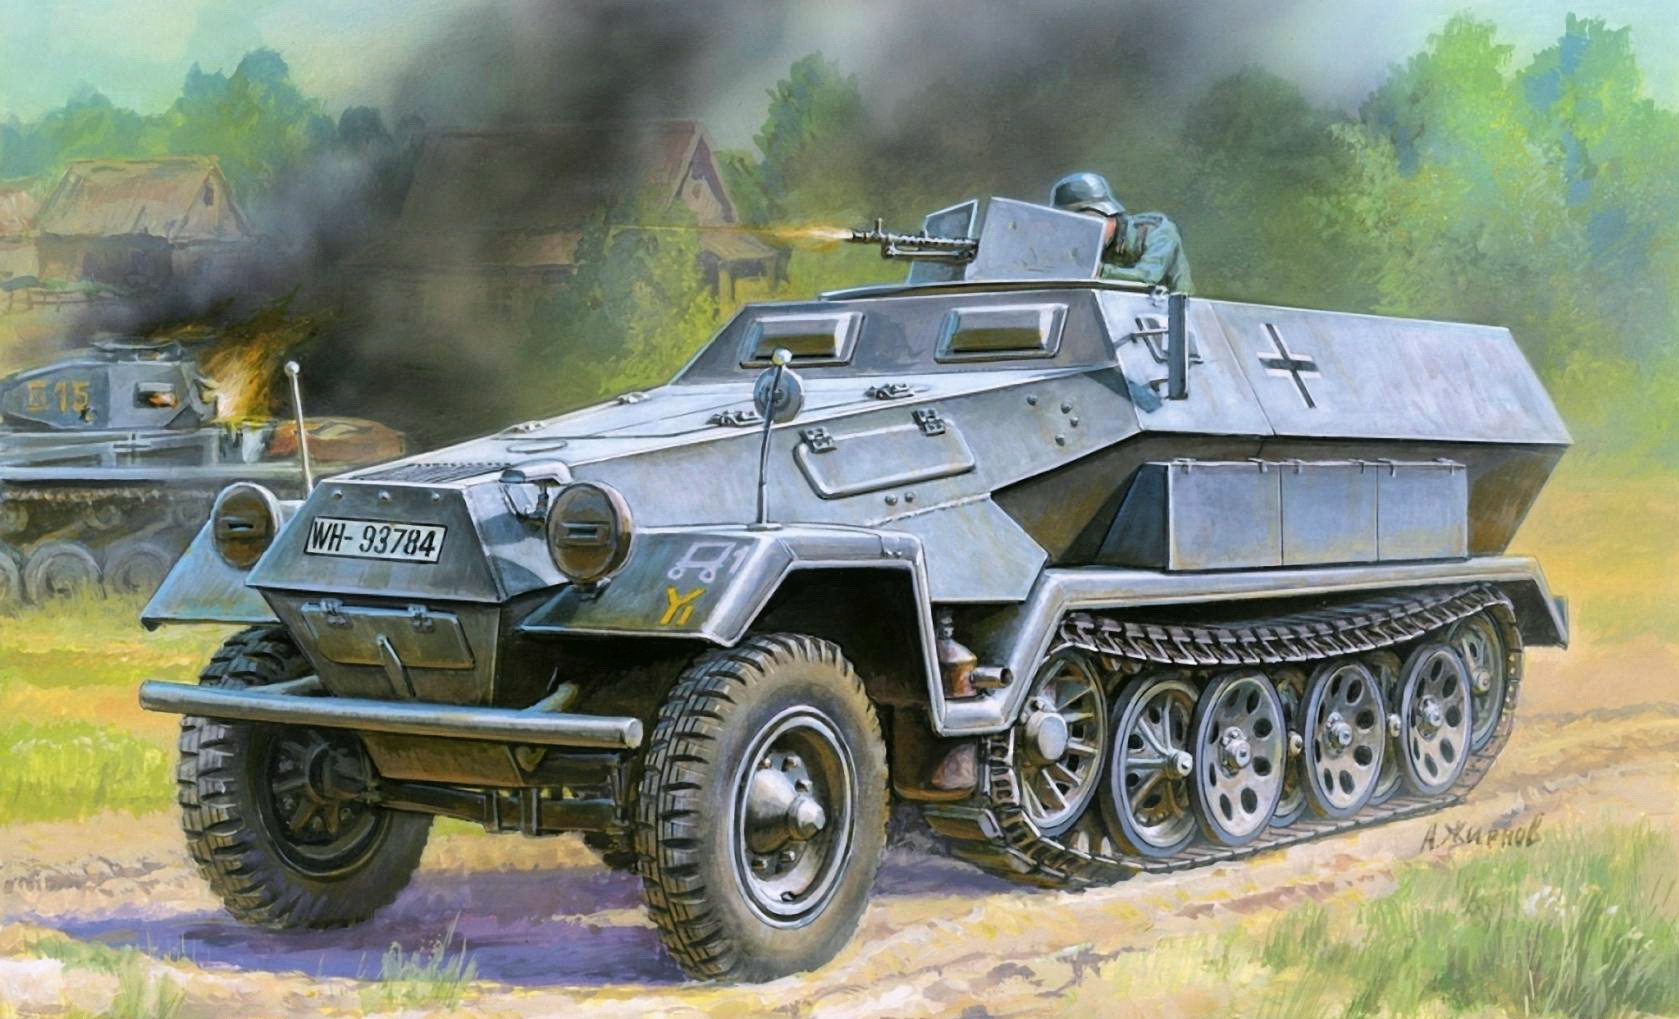 https://static.wikia.nocookie.net/axispower7central/images/4/40/Sd.Kfz._251_Halftrack.jpg/revision/latest?cb=20120703022508